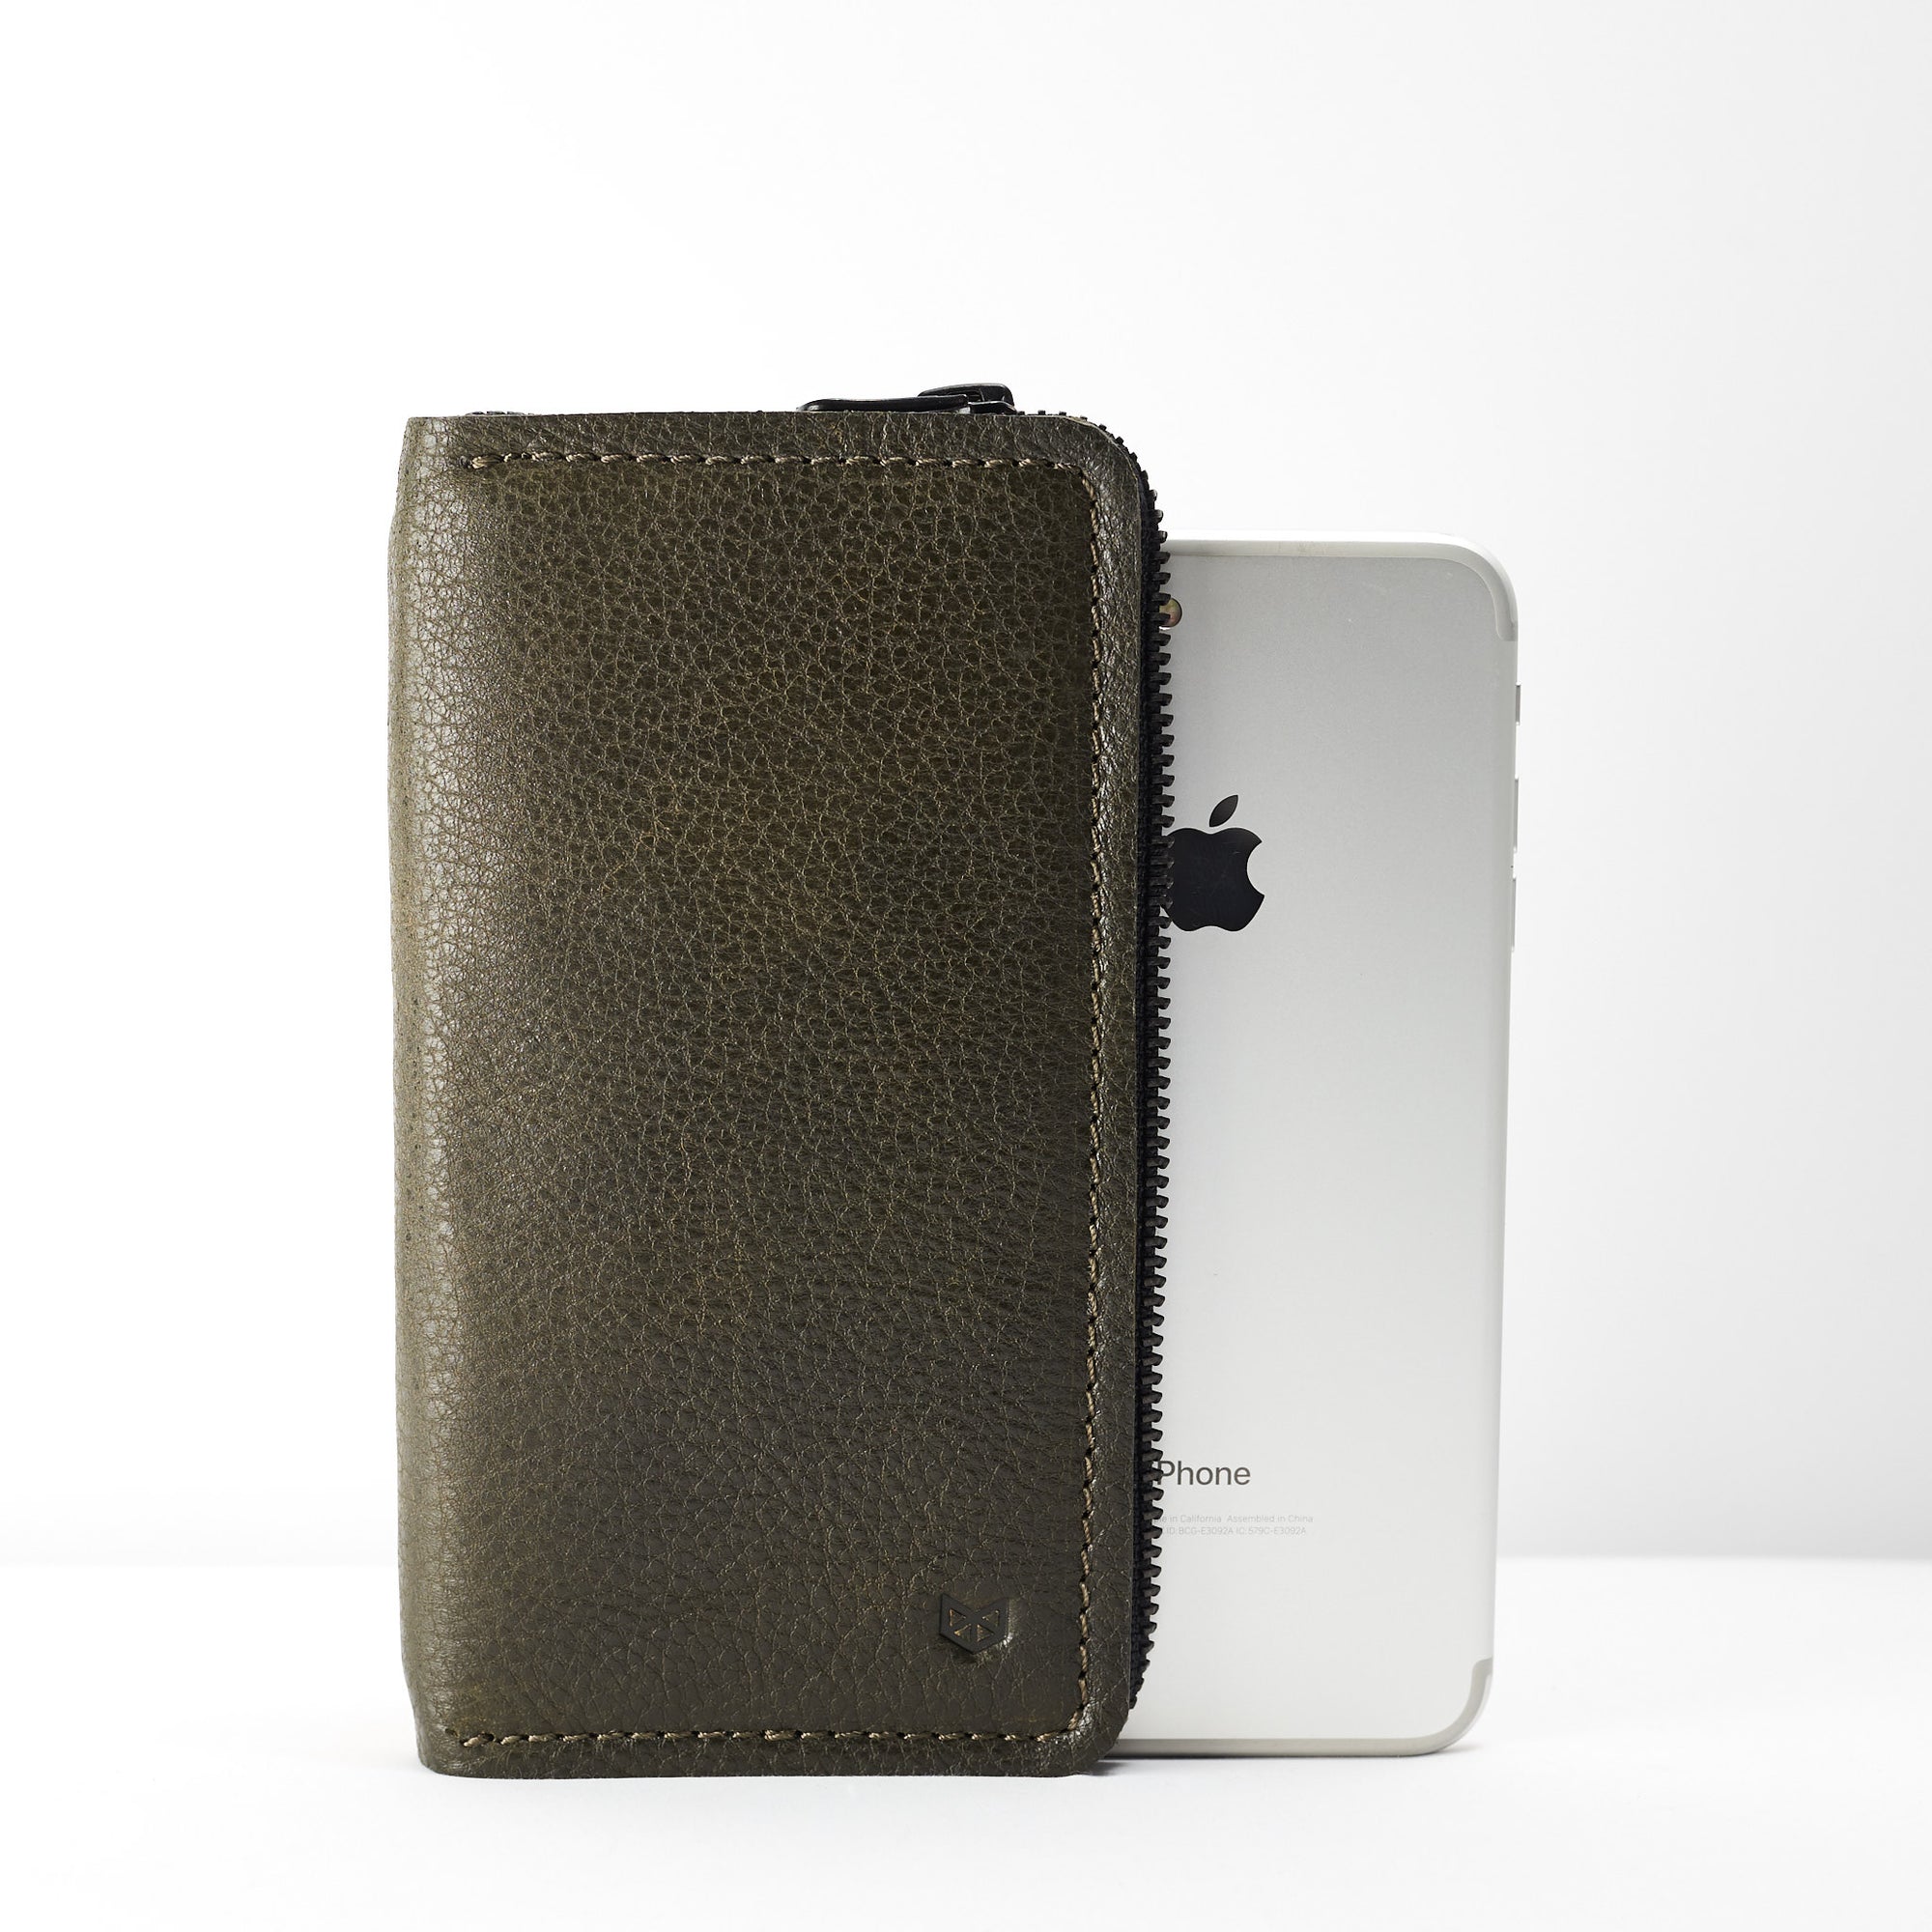 Green iPhone leather wallet stand case for mens gifts. iPhone x, iPhone 10, iPhone 8 plus leather stand sleeve